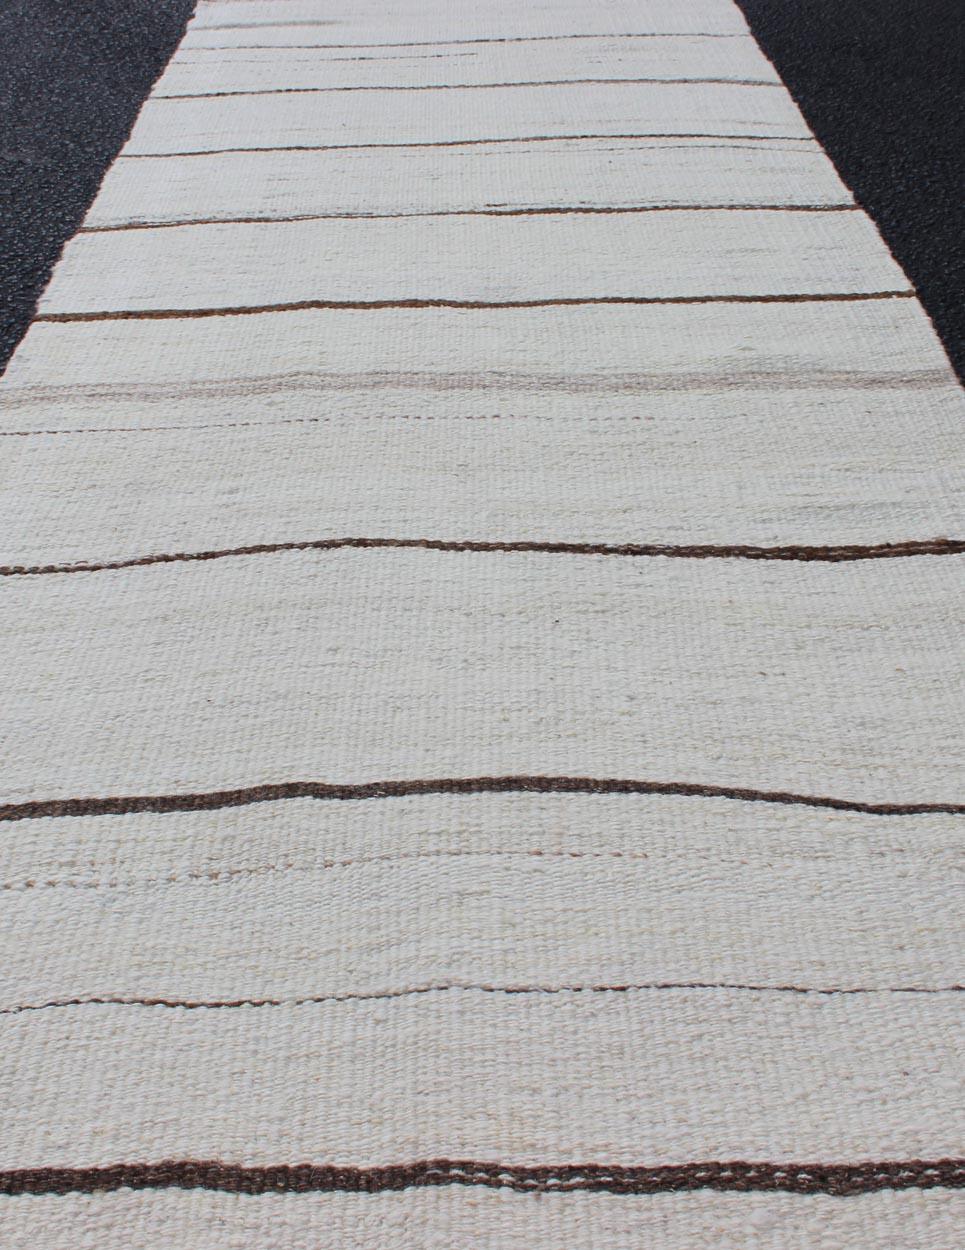 Minimalist Design Vintage Turkish Kilim Runner with Creams, Brown and Ivory. Keivan Woven Arts / rug EN-16, country of origin / type: Turkey / Kilim, circa 1950

Measures: 2' x 8' 

This flat-woven Kilim runner from Turkey features an understated